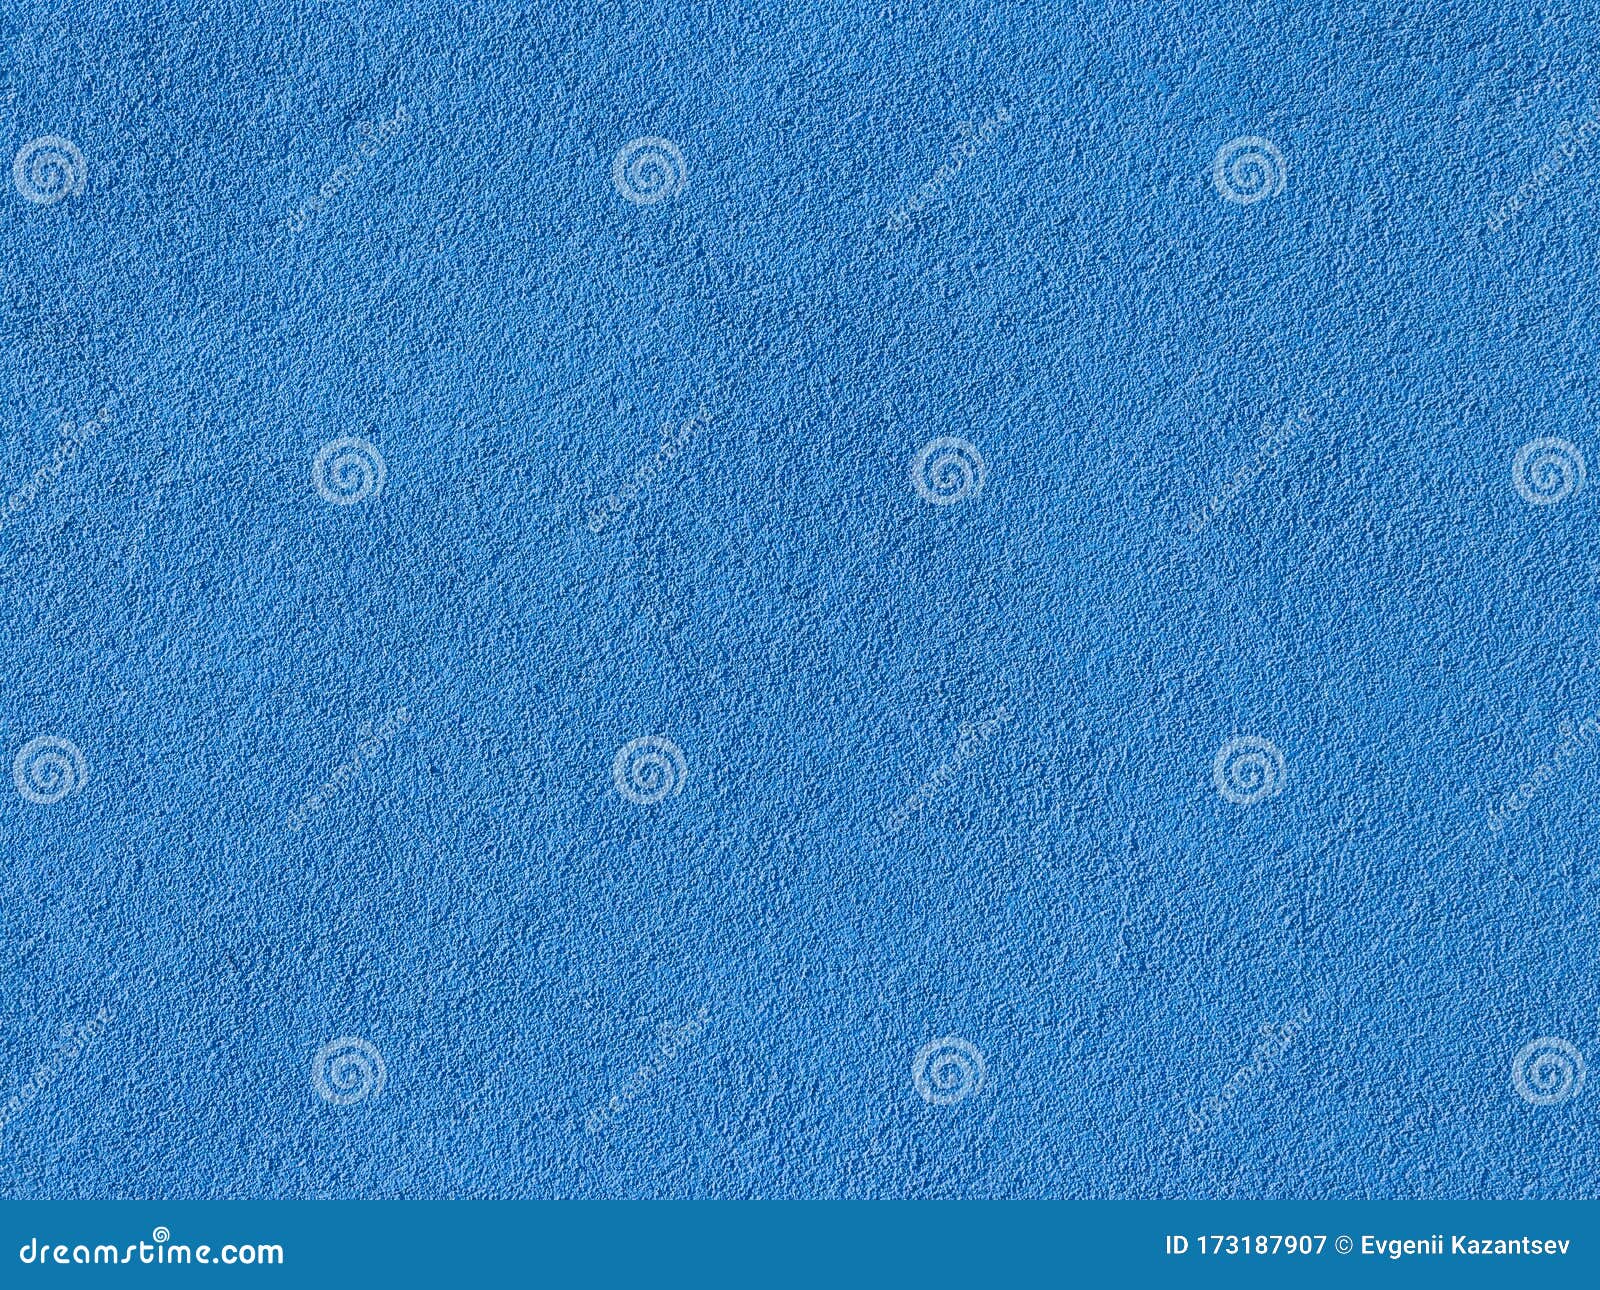 Seamless Texture. the Plastered Wall is Painted with Blue Paint Stock ...